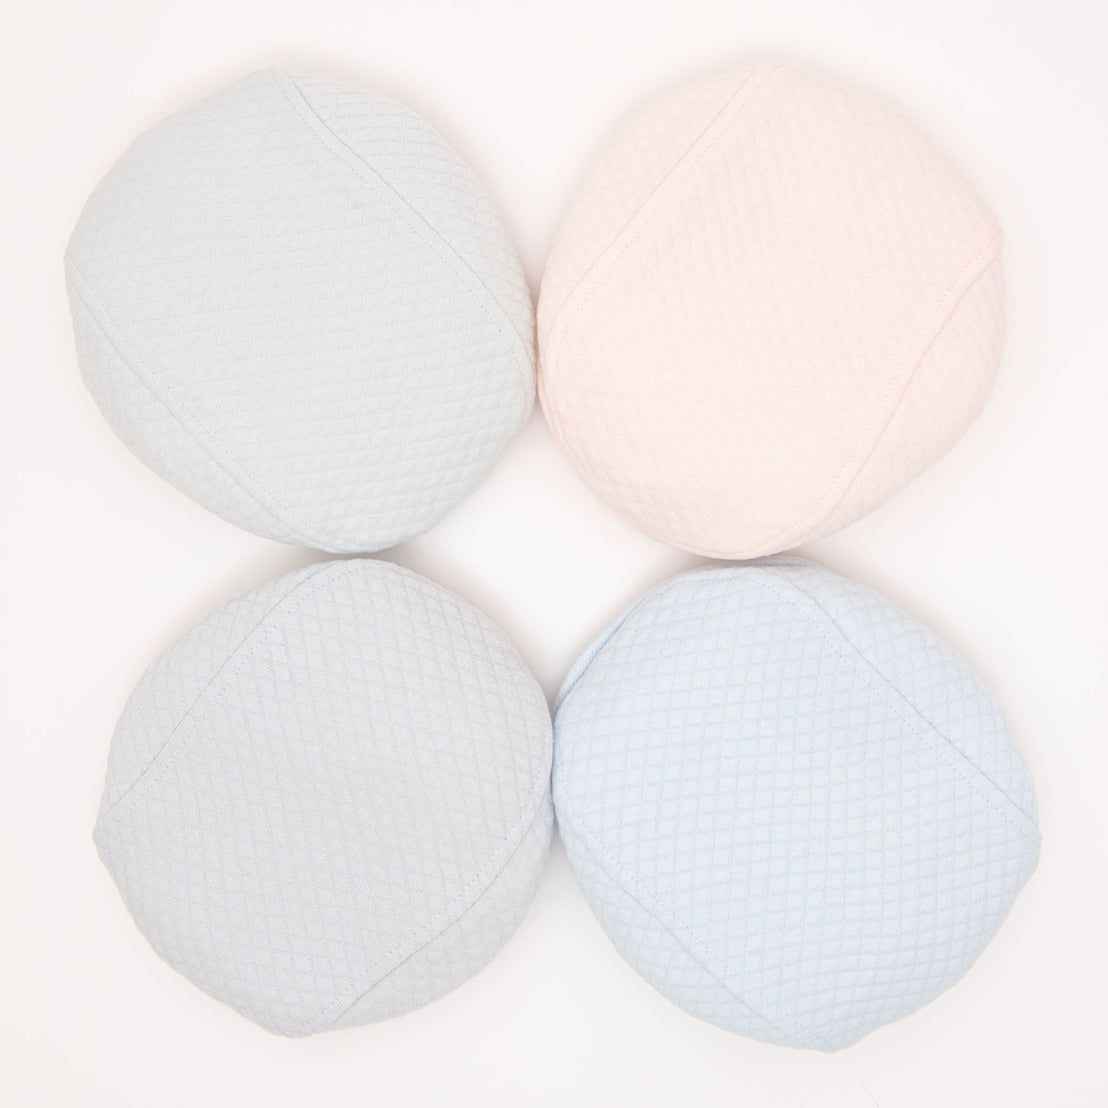 Flat lay photo of the four Asher Quilted Newsboy Caps in colors grey, pink, powder blue and soft teal.